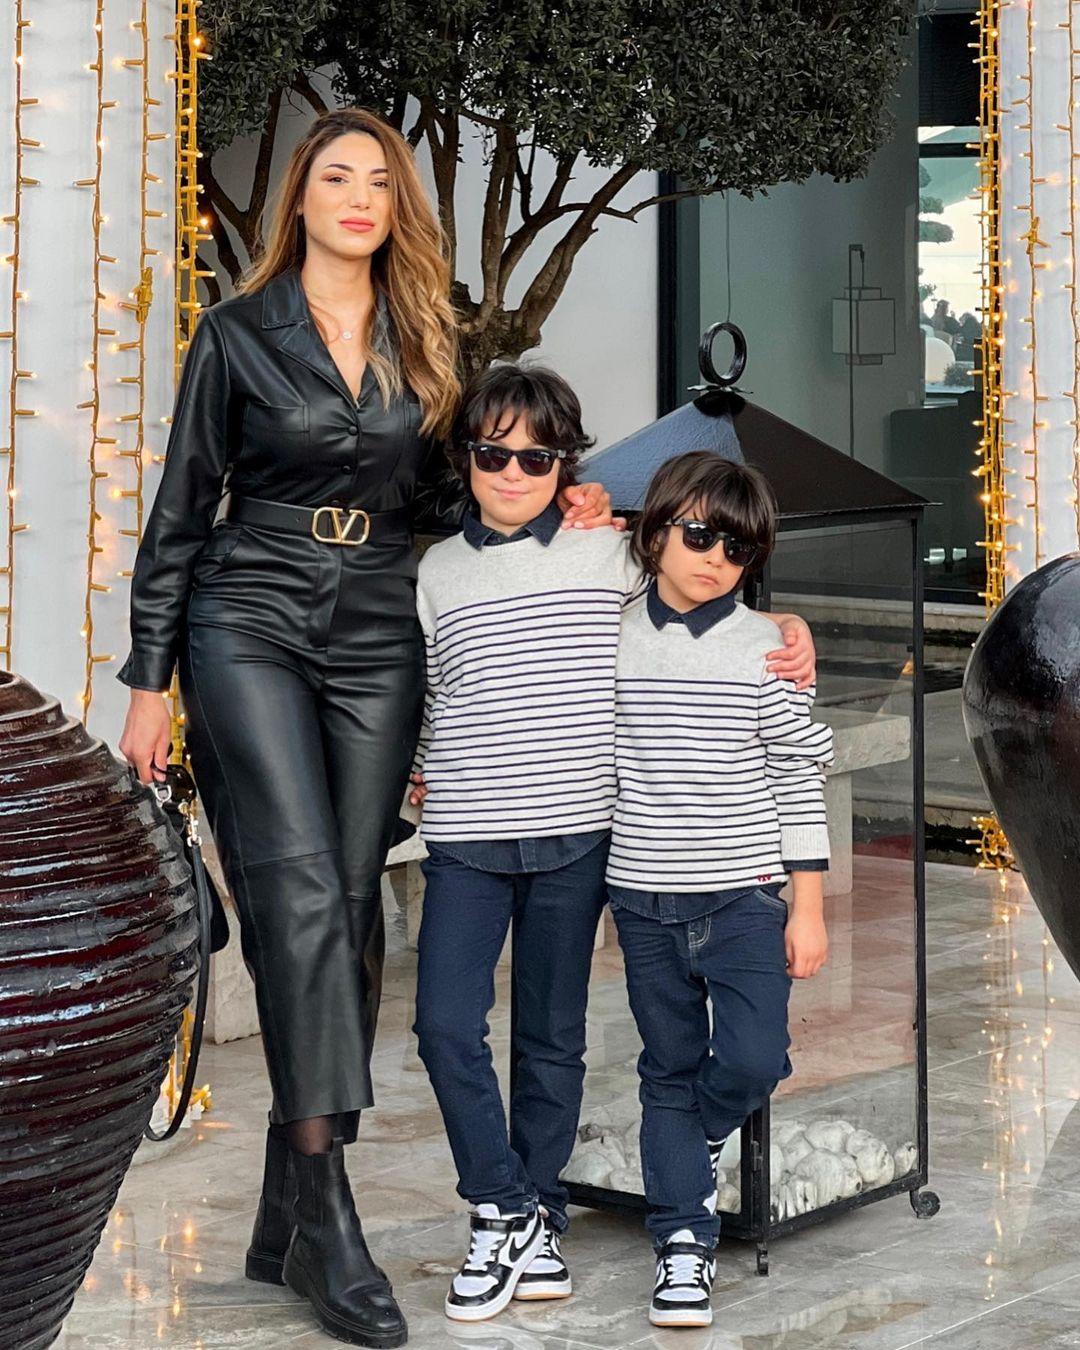 class="content__text"
 Sunday photo dump..🤍 
Ils ont tellement grandi! Vous trouvez? 🙈🙈 

Kids outfit are from @taomanarcity@taotunisiamall@taomallofsousse 

 #January #2023 #Tunisia #FamilyTime #StylishBoys 
 